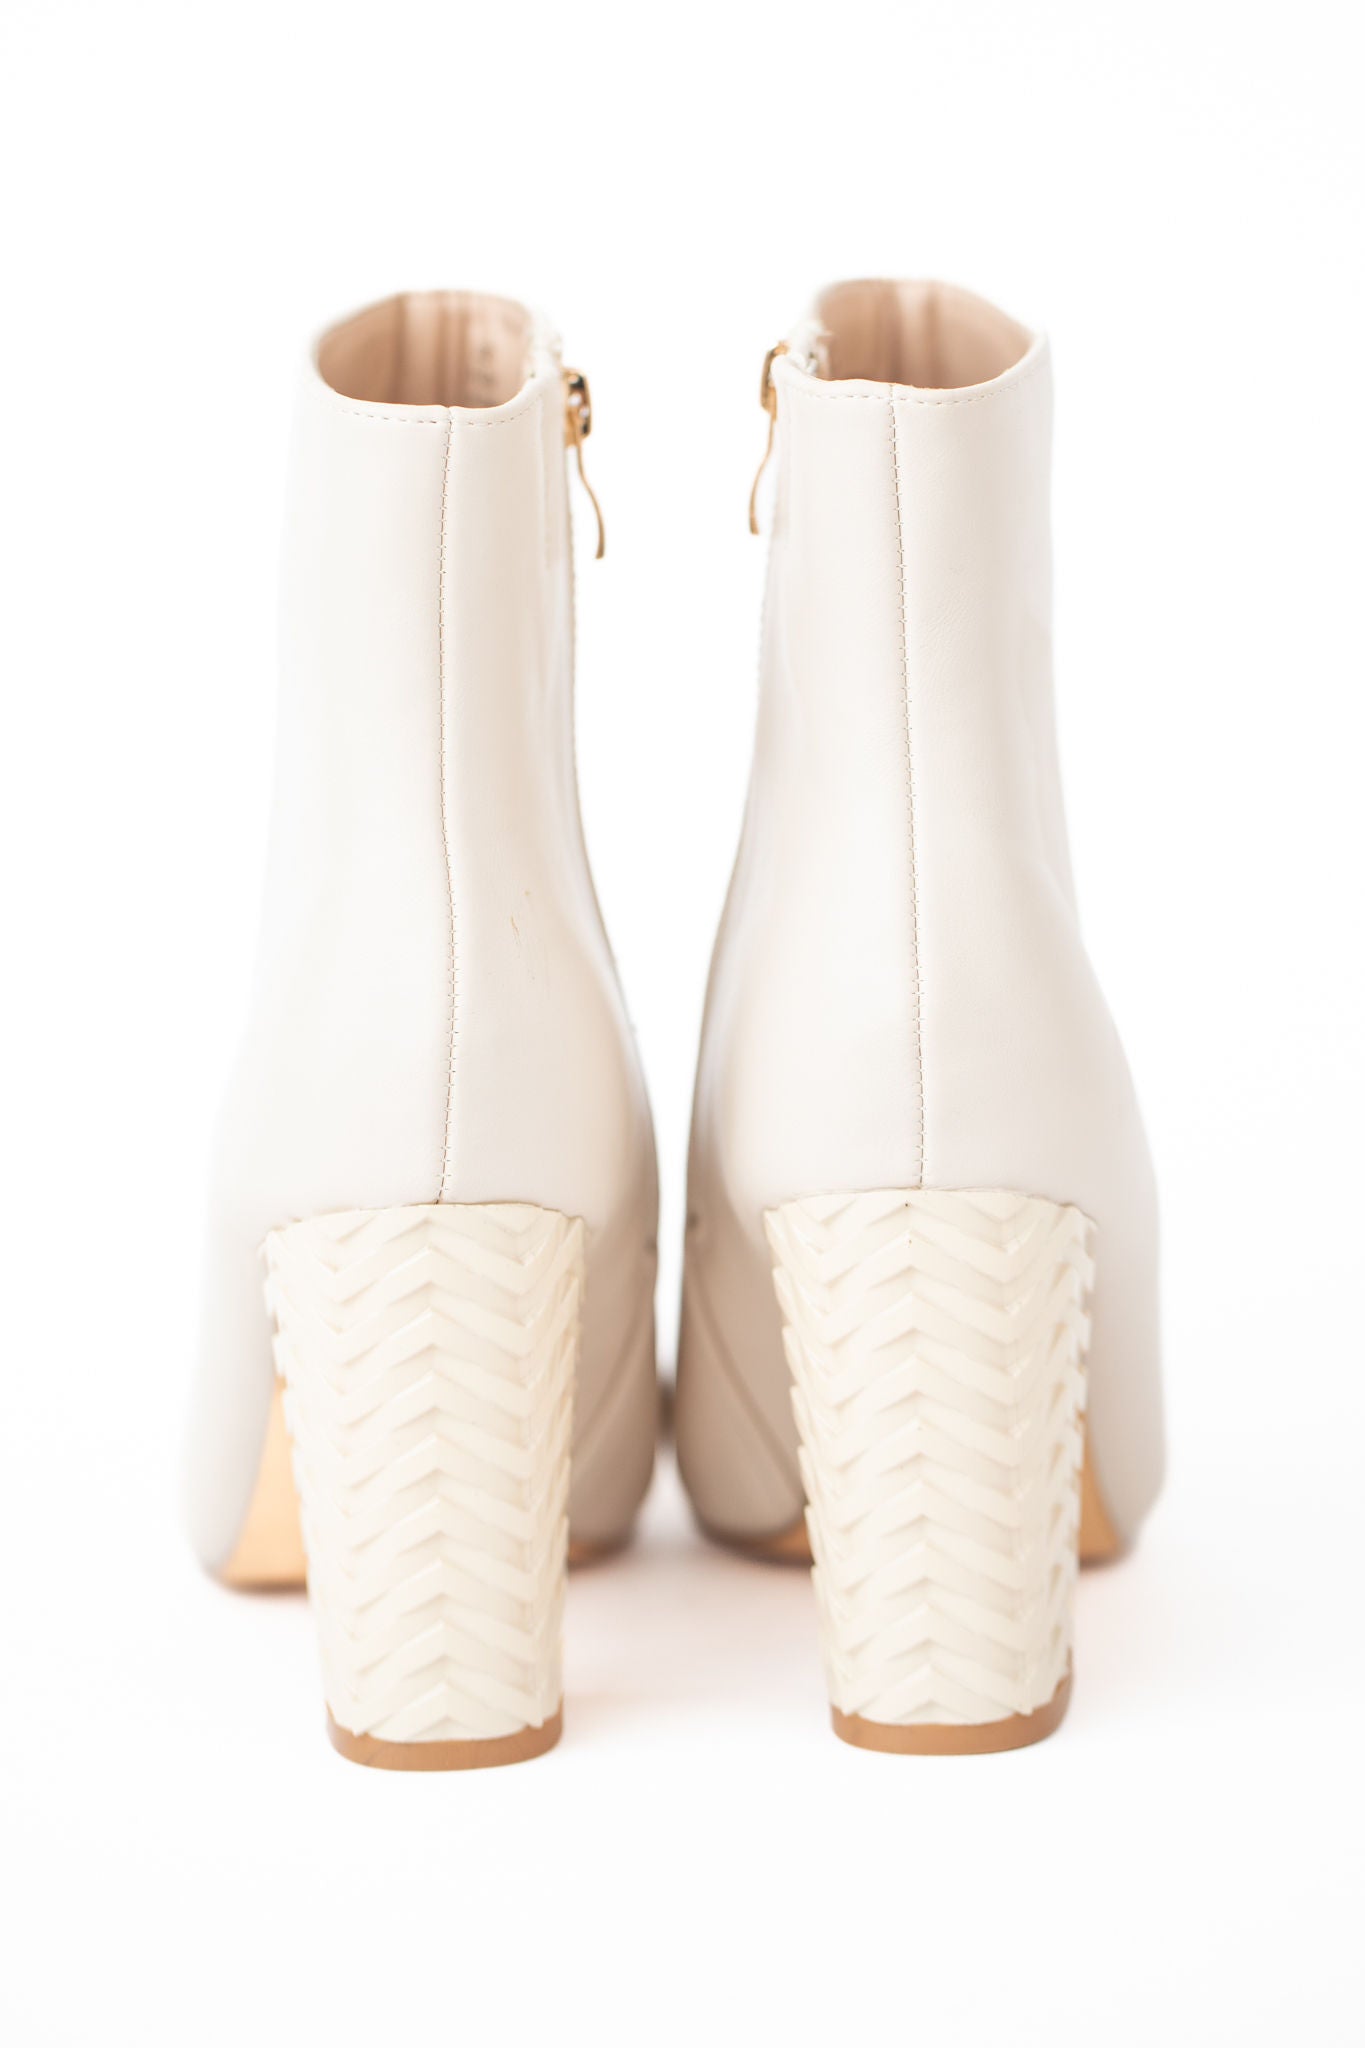 Donatee Low Heels Ankle Boots In Beige Leather